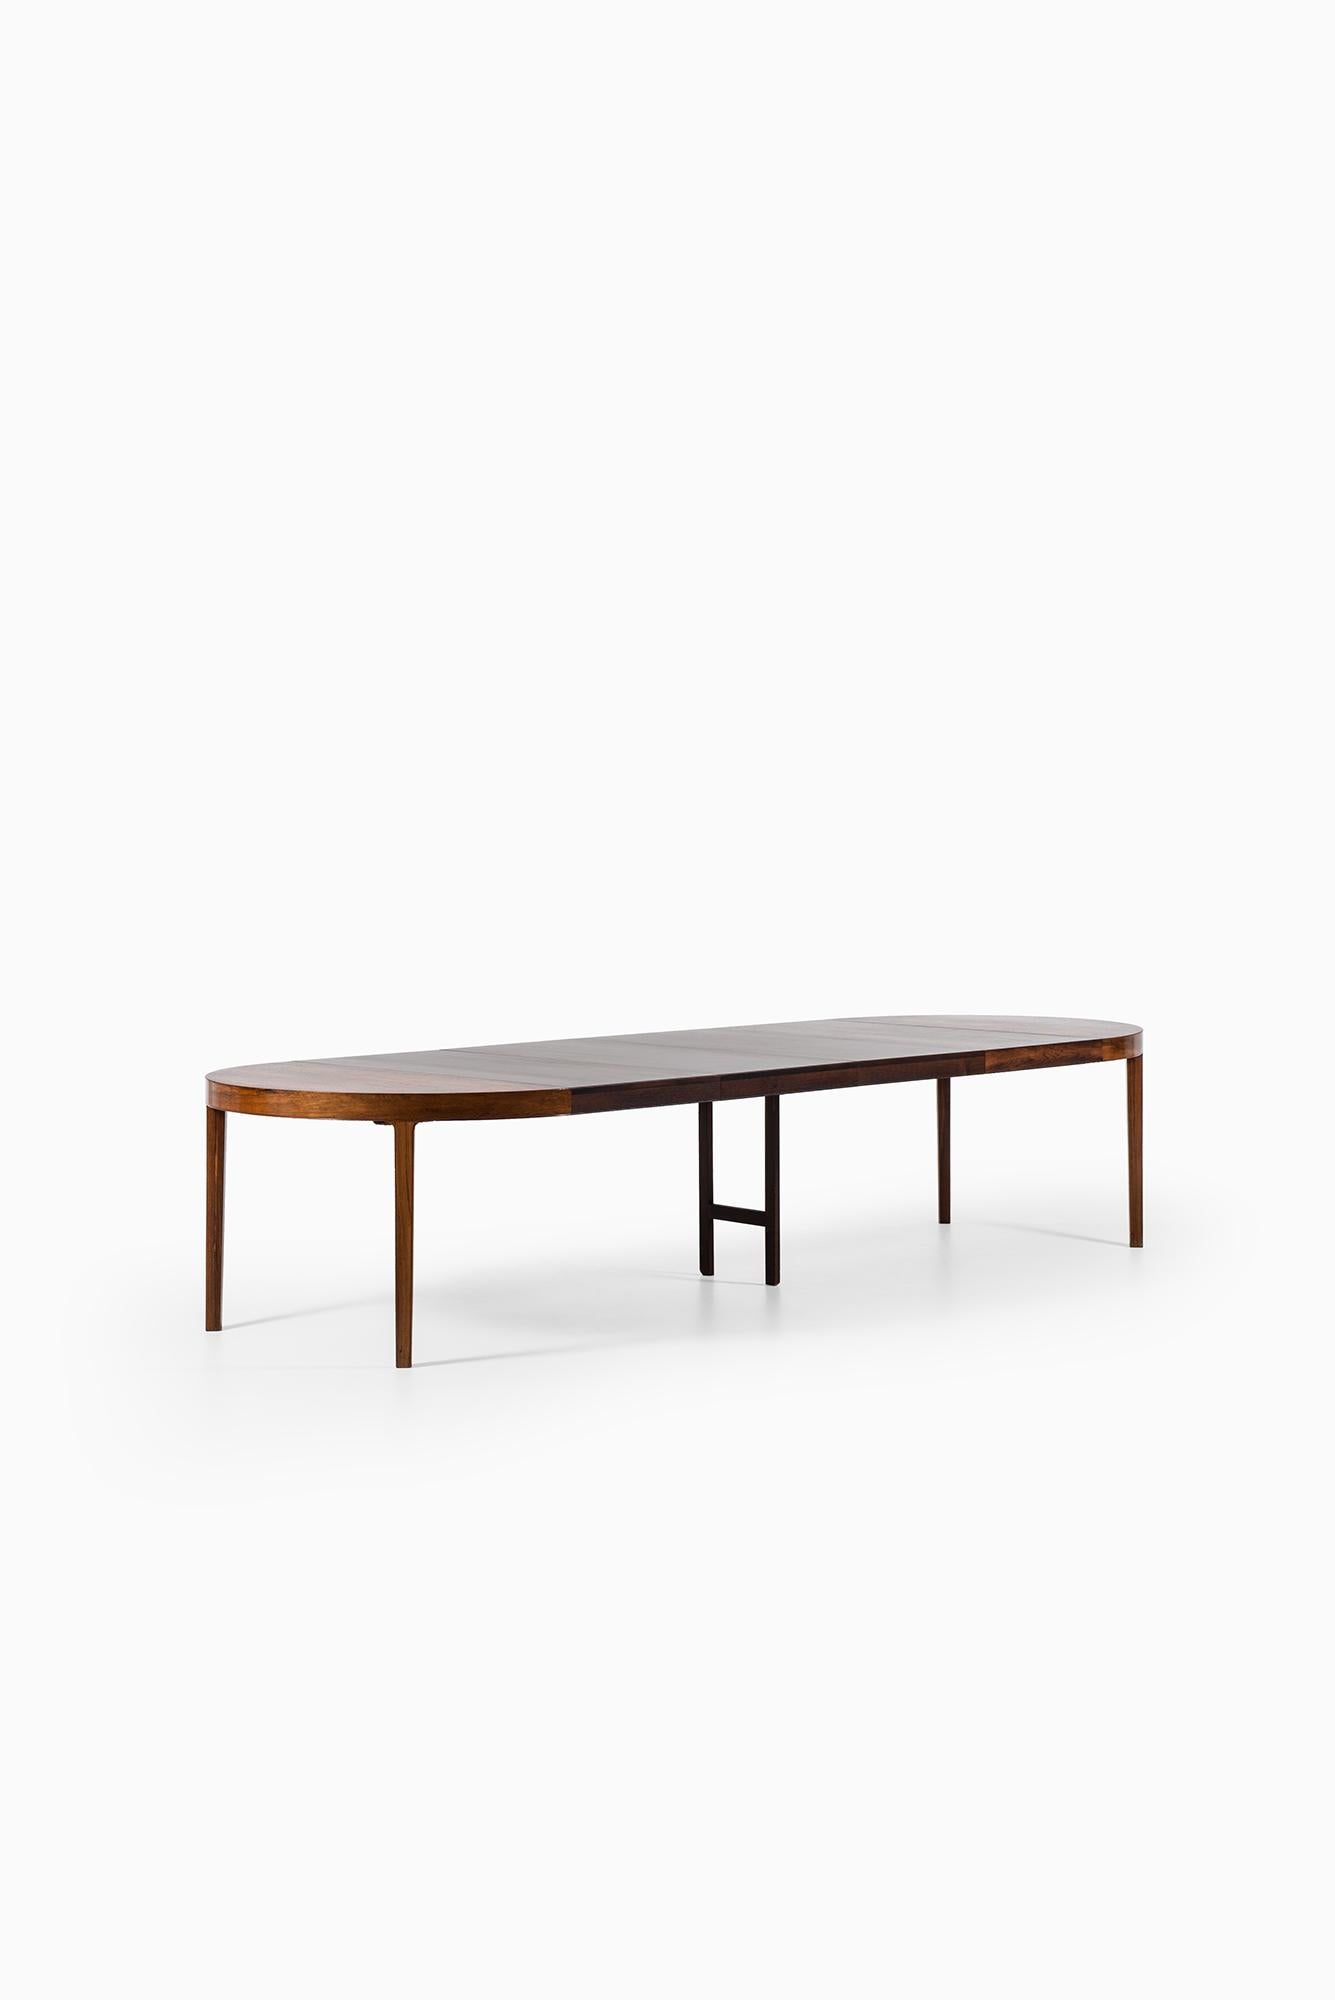 Ole Wanscher Large Dining Table by Cabinetmaker A.J. Iversen in Denmark 2